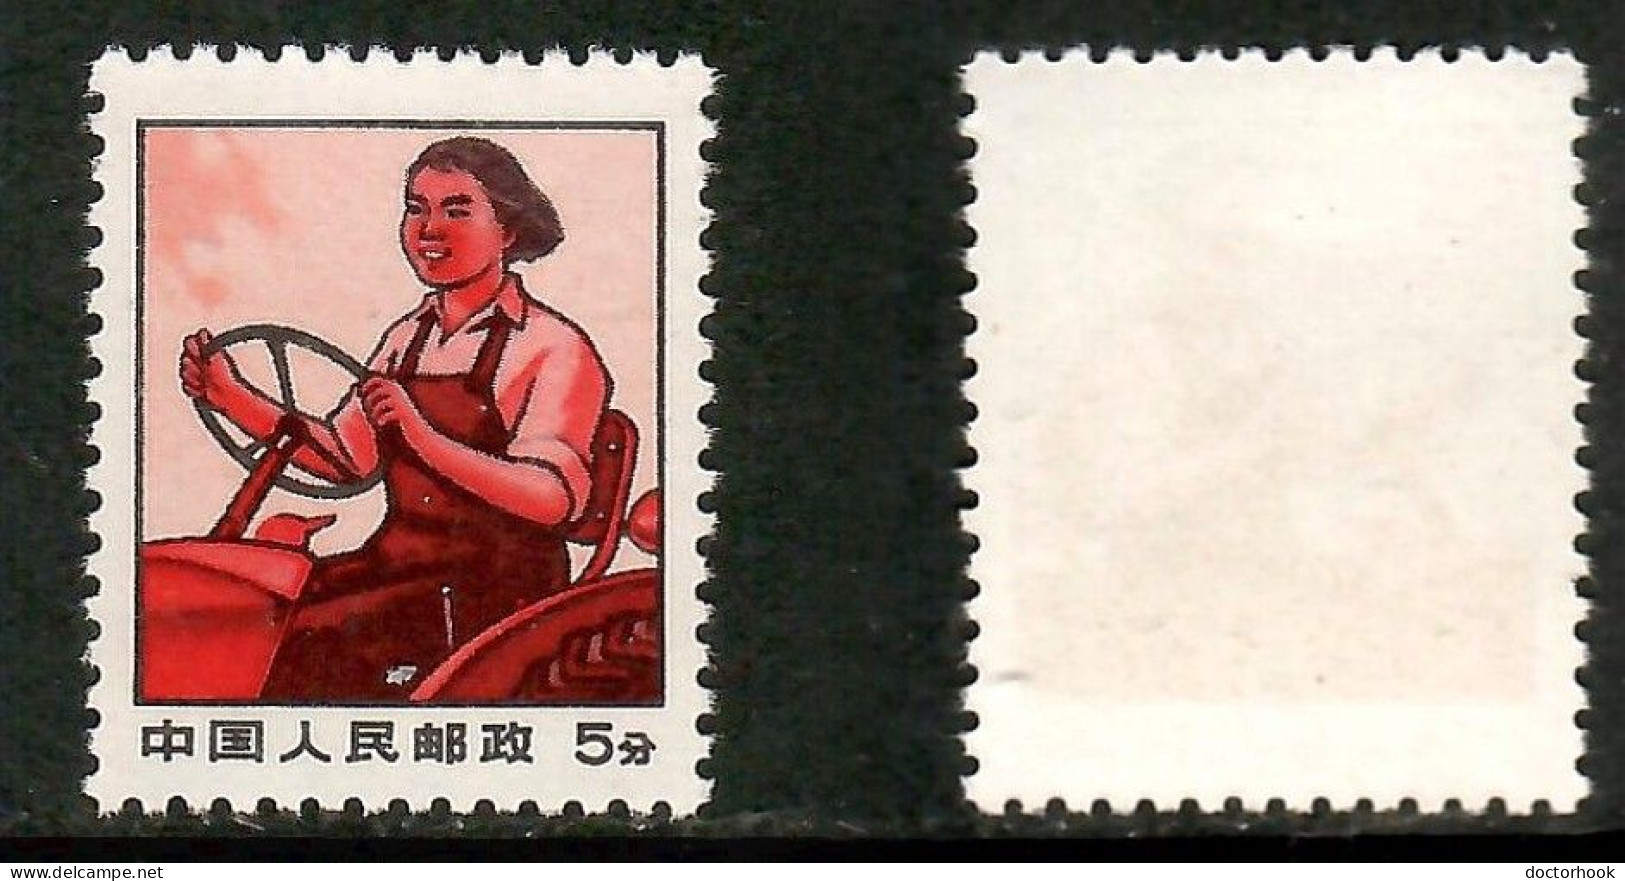 PEOPLES REPUBLIC Of CHINA   Scott # 1024* MINT NO GUM AS ISSUED (CONDITION AS PER SCAN) (Stamp Scan # 1012-4) - Unused Stamps